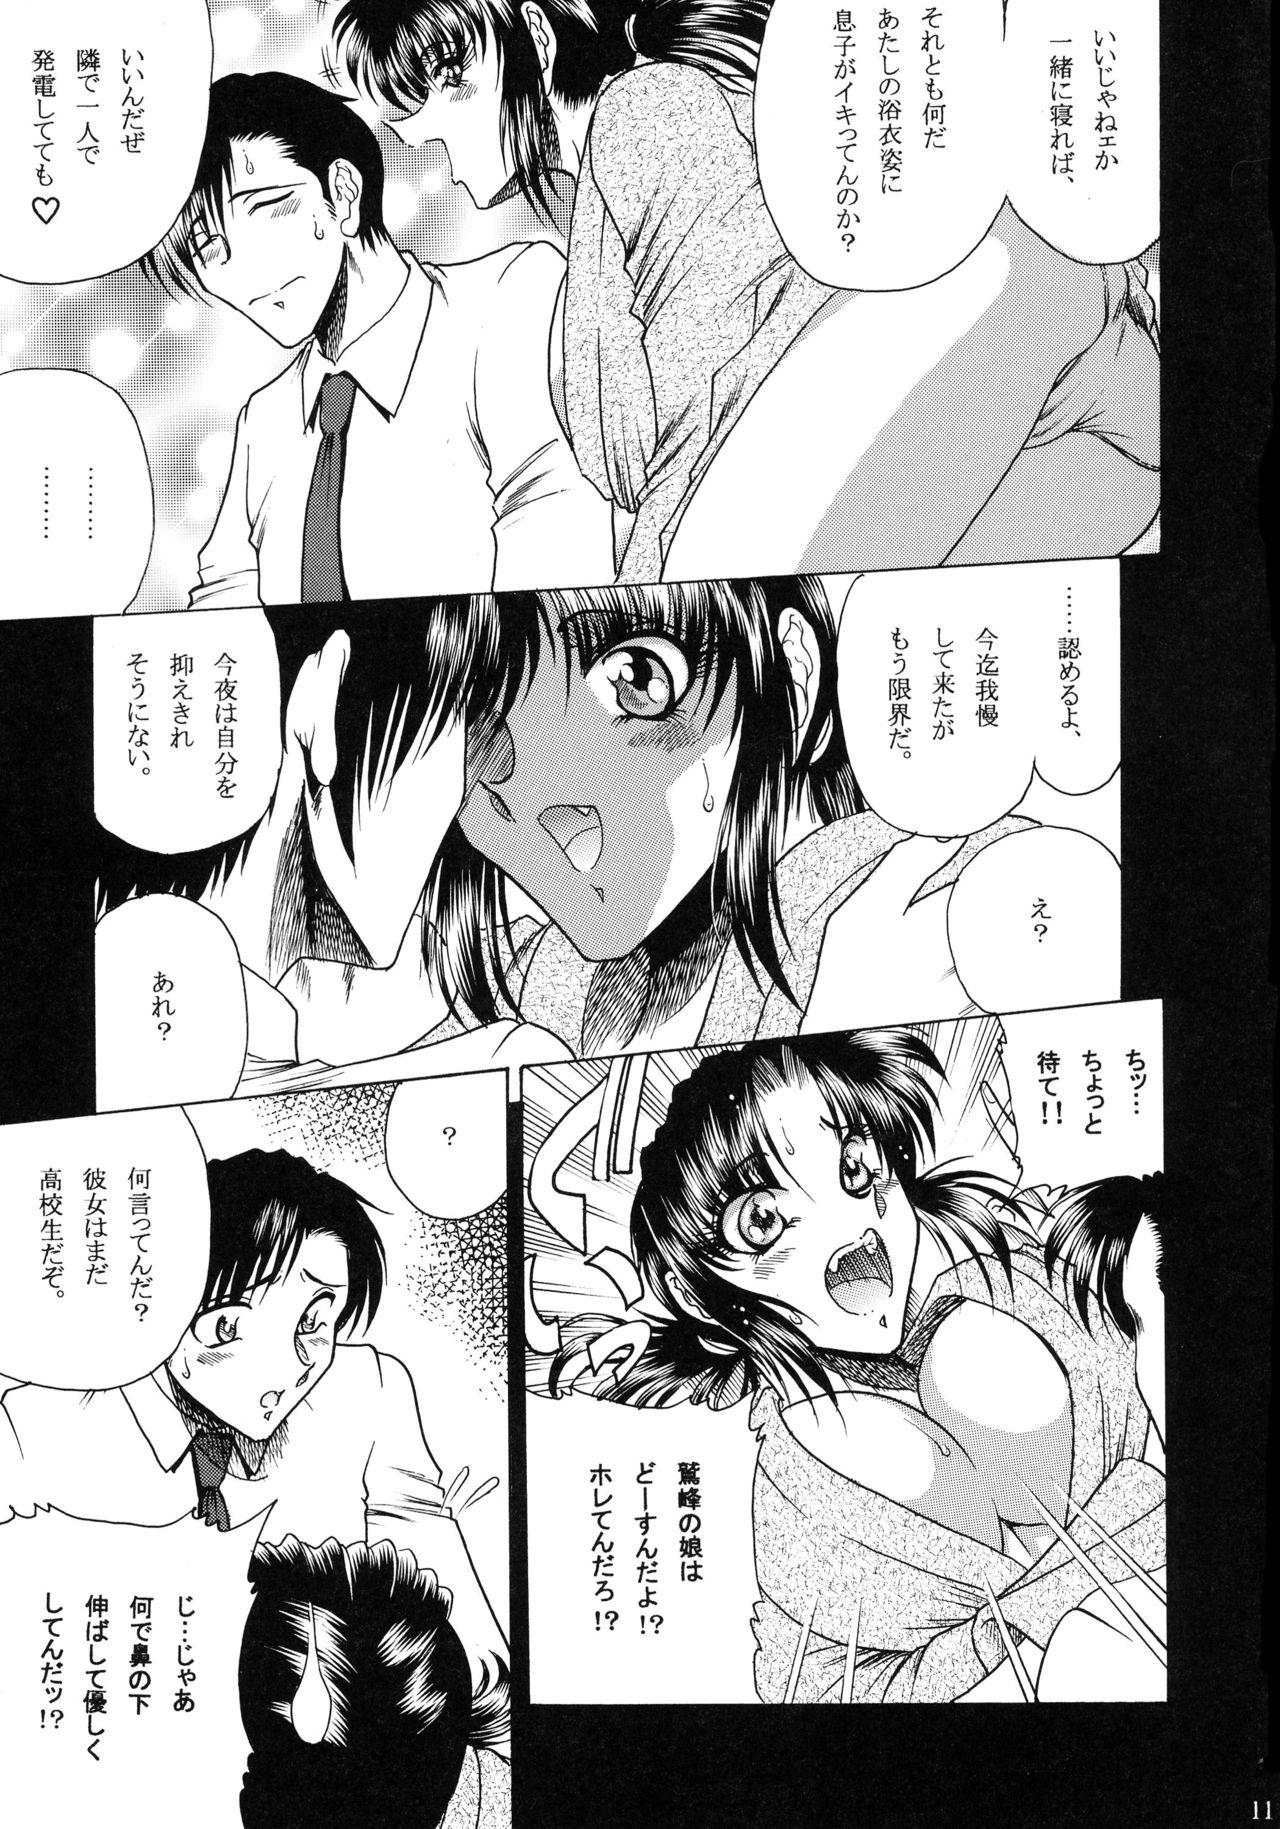 Best Blowjob ZONE 38 China Syndrome - Black lagoon Emo - Page 10